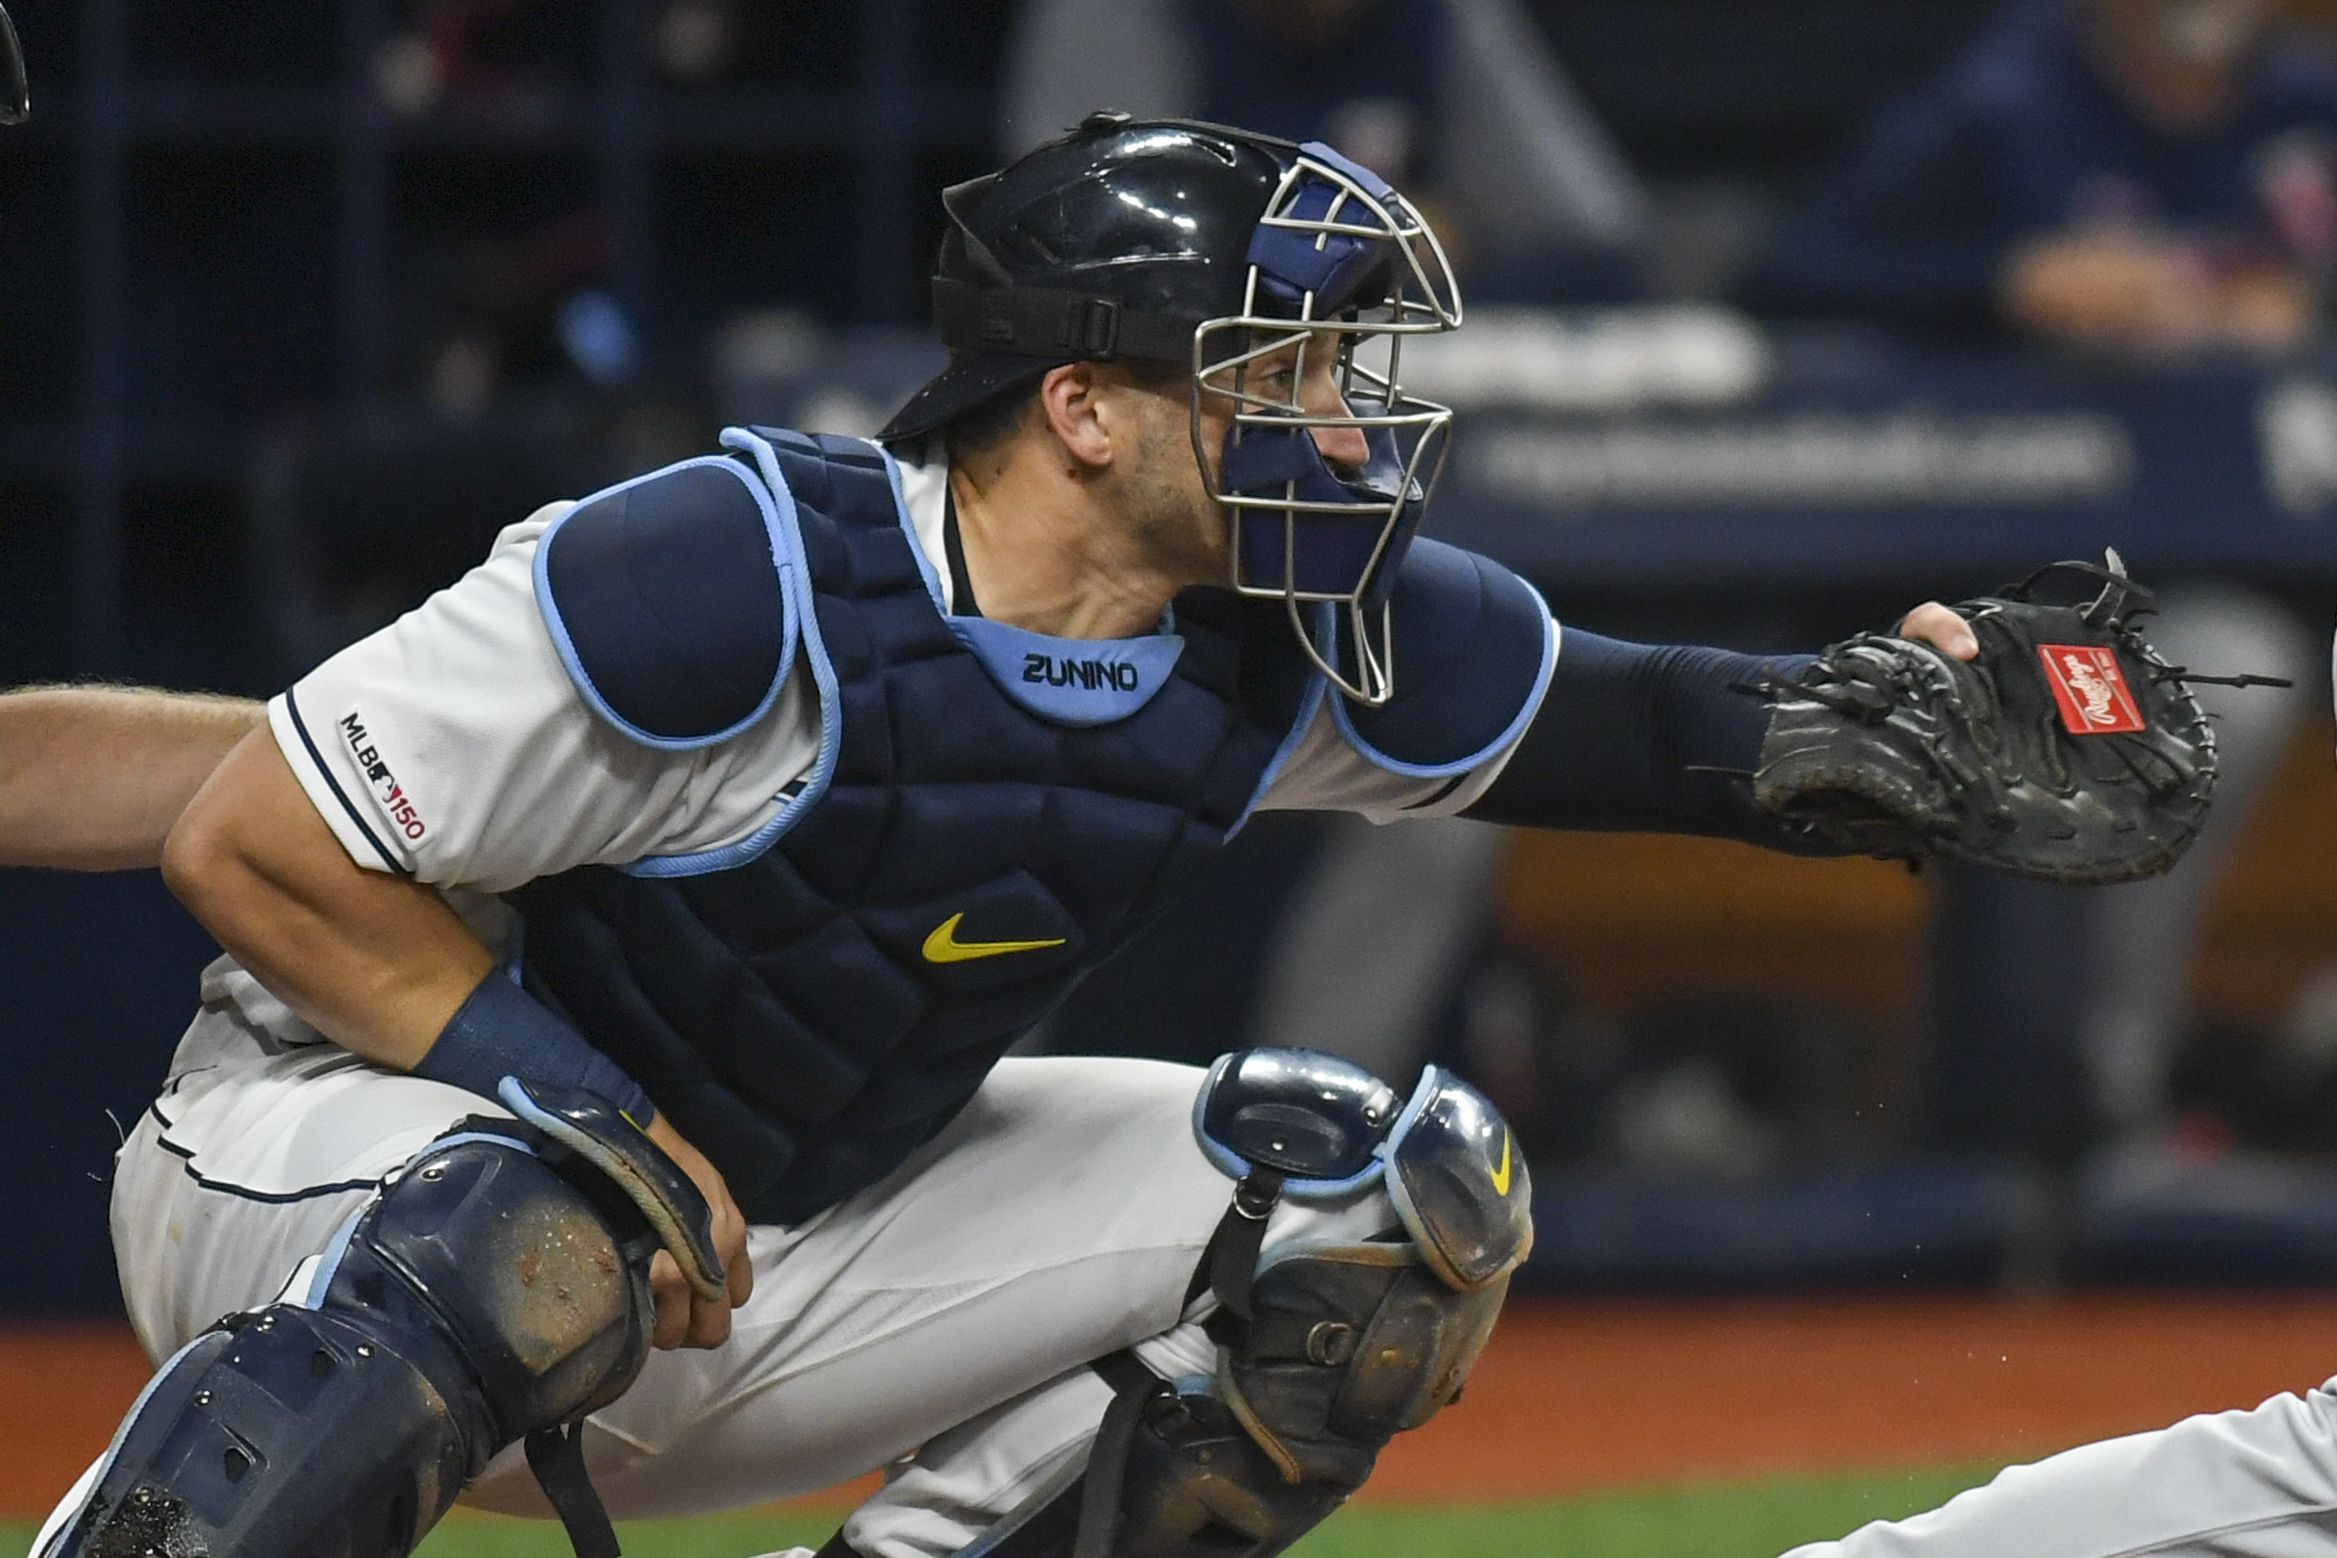 Rays journal: Mike Zunino questionable with quad tightness